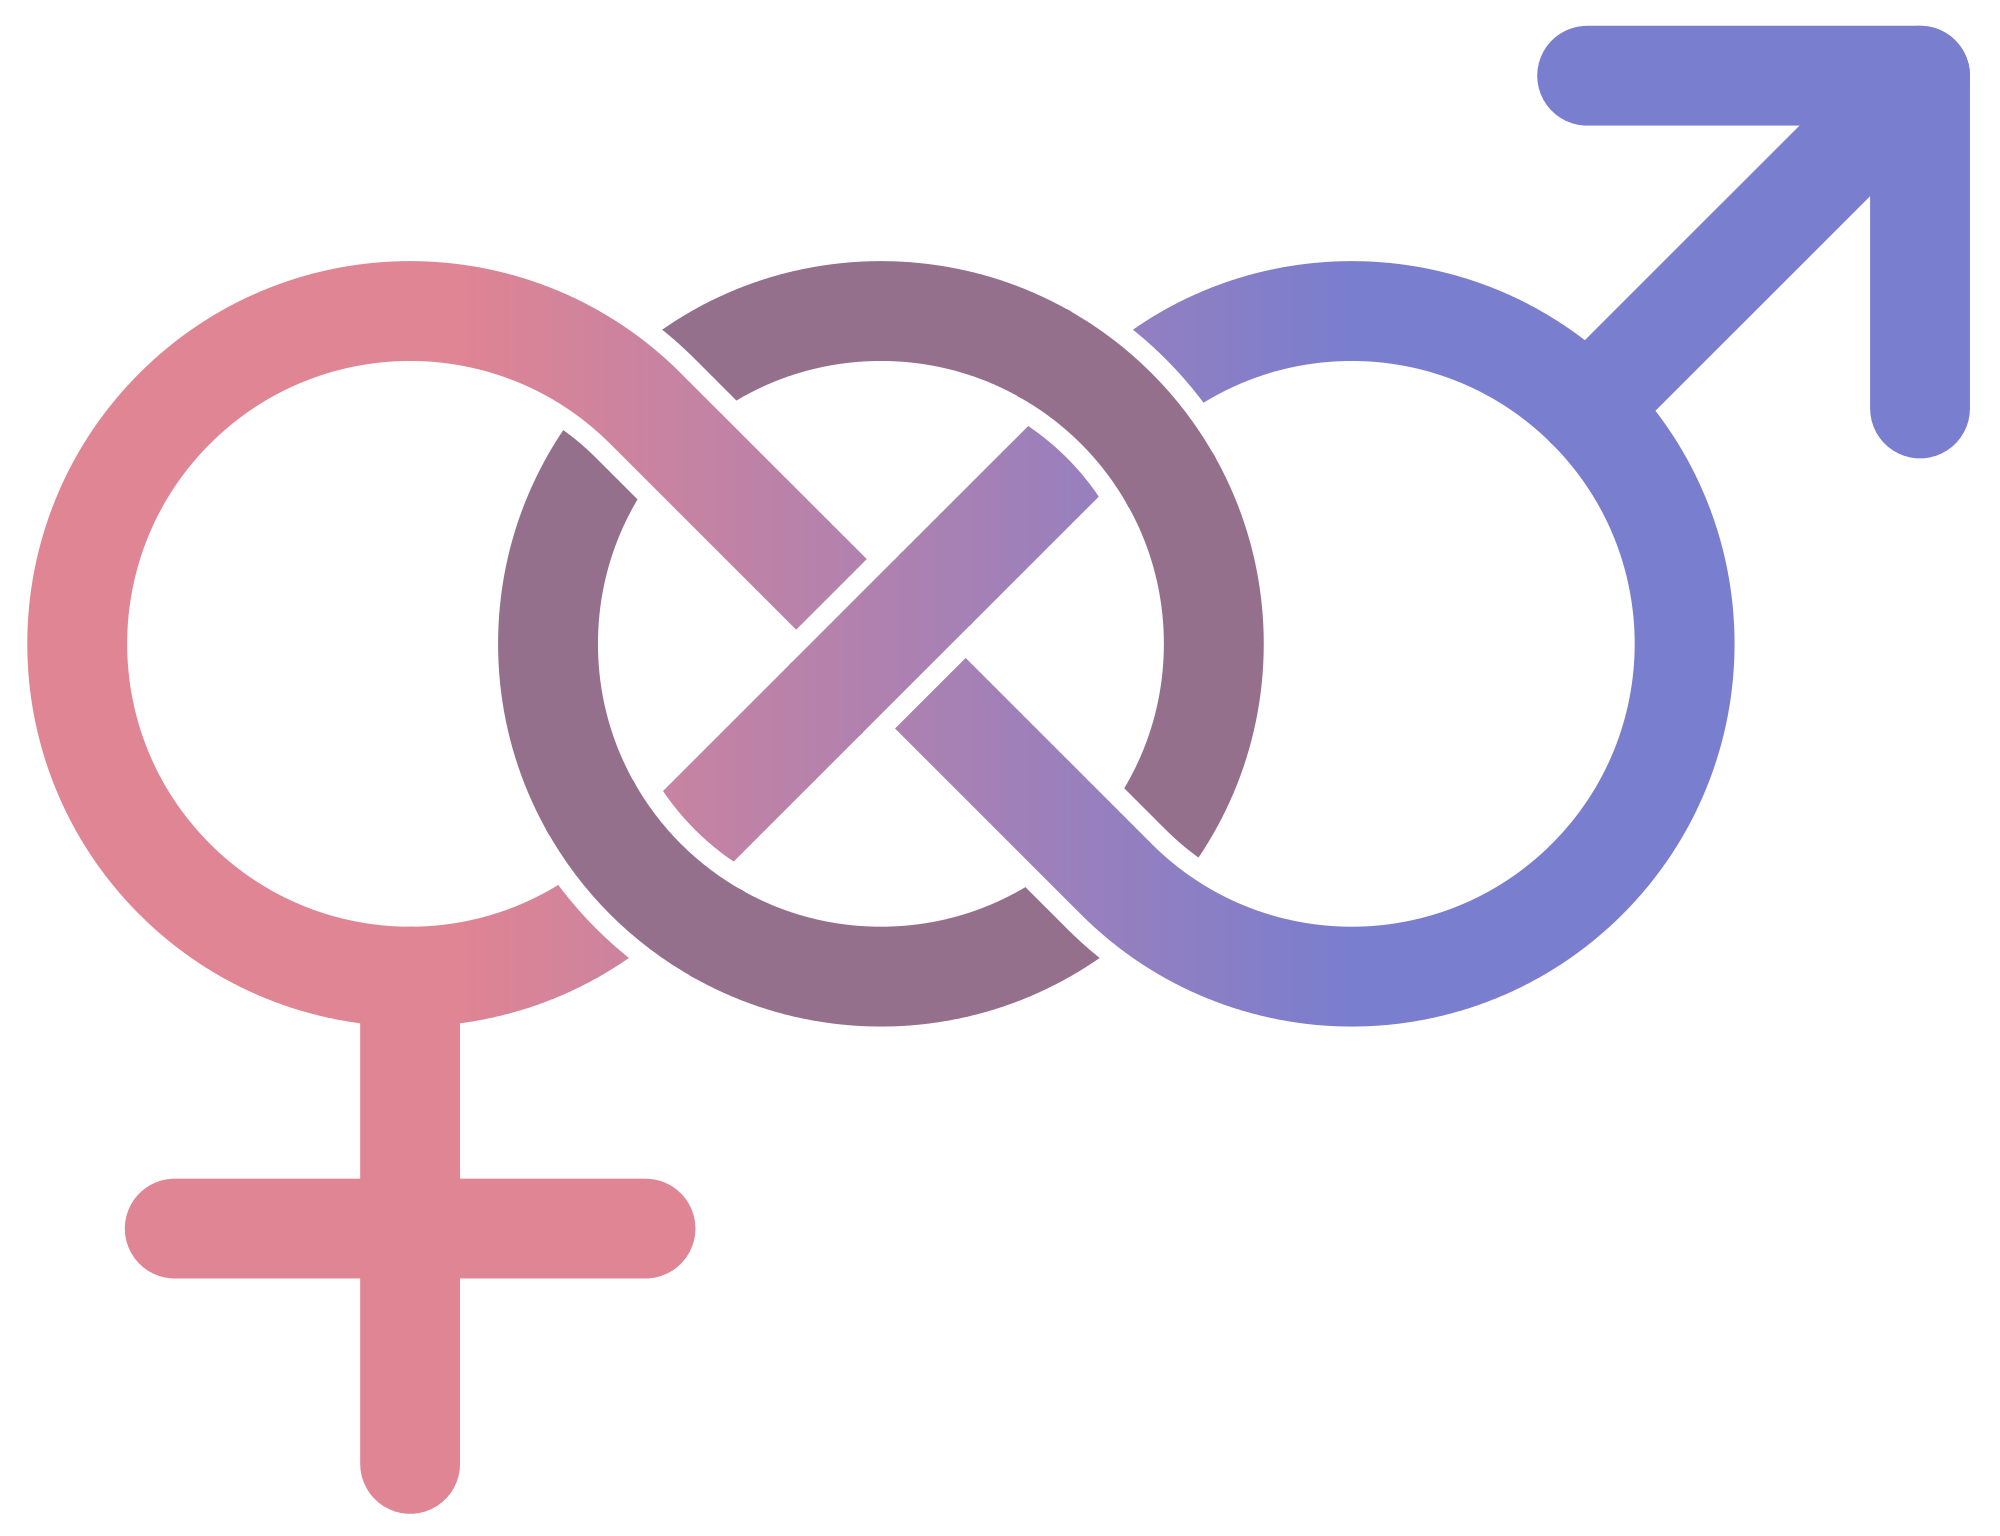 PICK ONE: There are either two genders, or an infinite number of genders … Which option is rooted in biological reality?